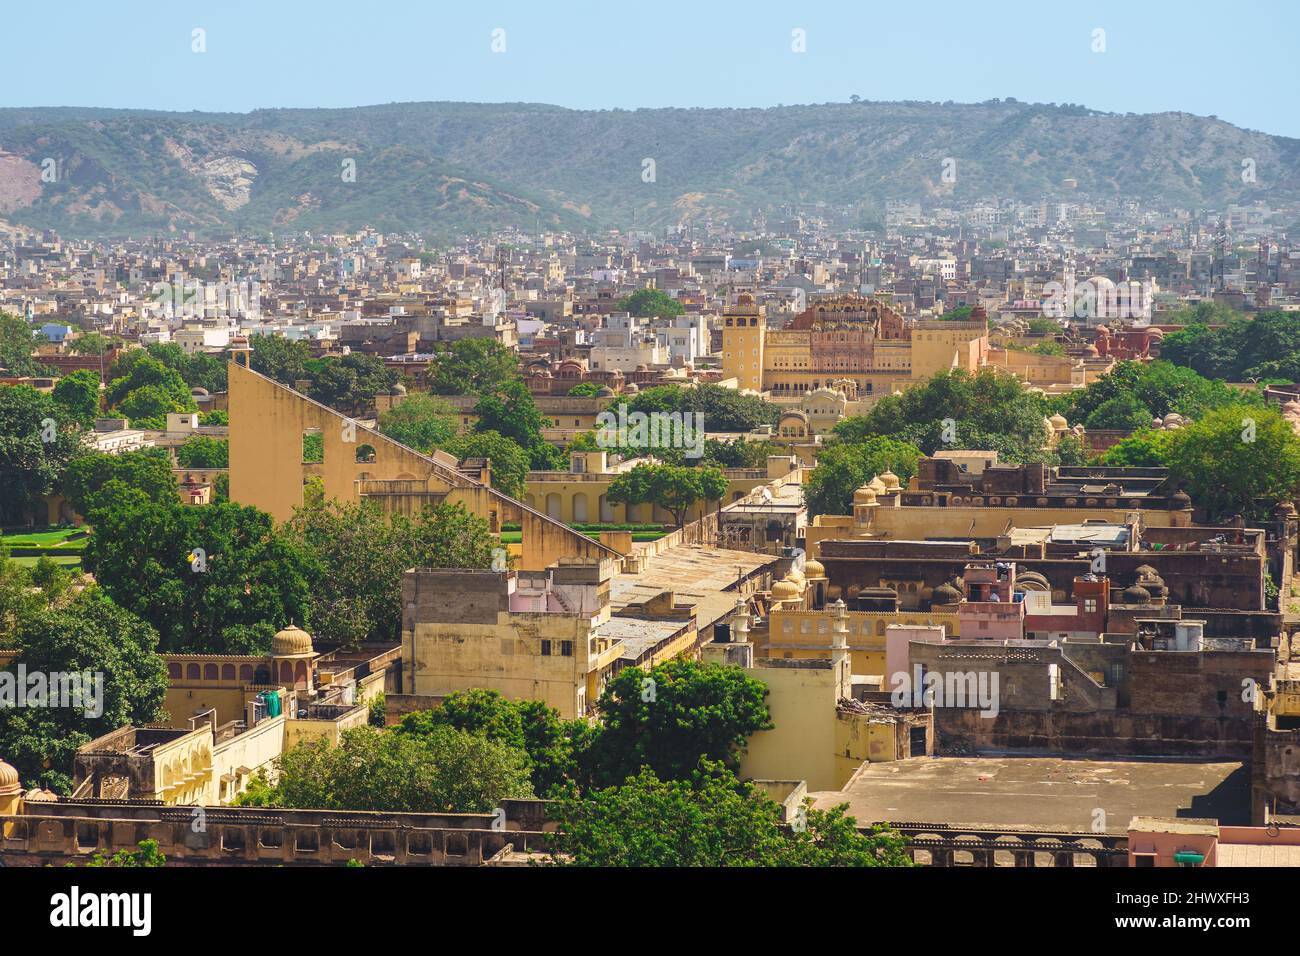 view of jaipur from Isarlat victory tower, aka Swargasuli Tower, in rajasthan, india Stock Photo